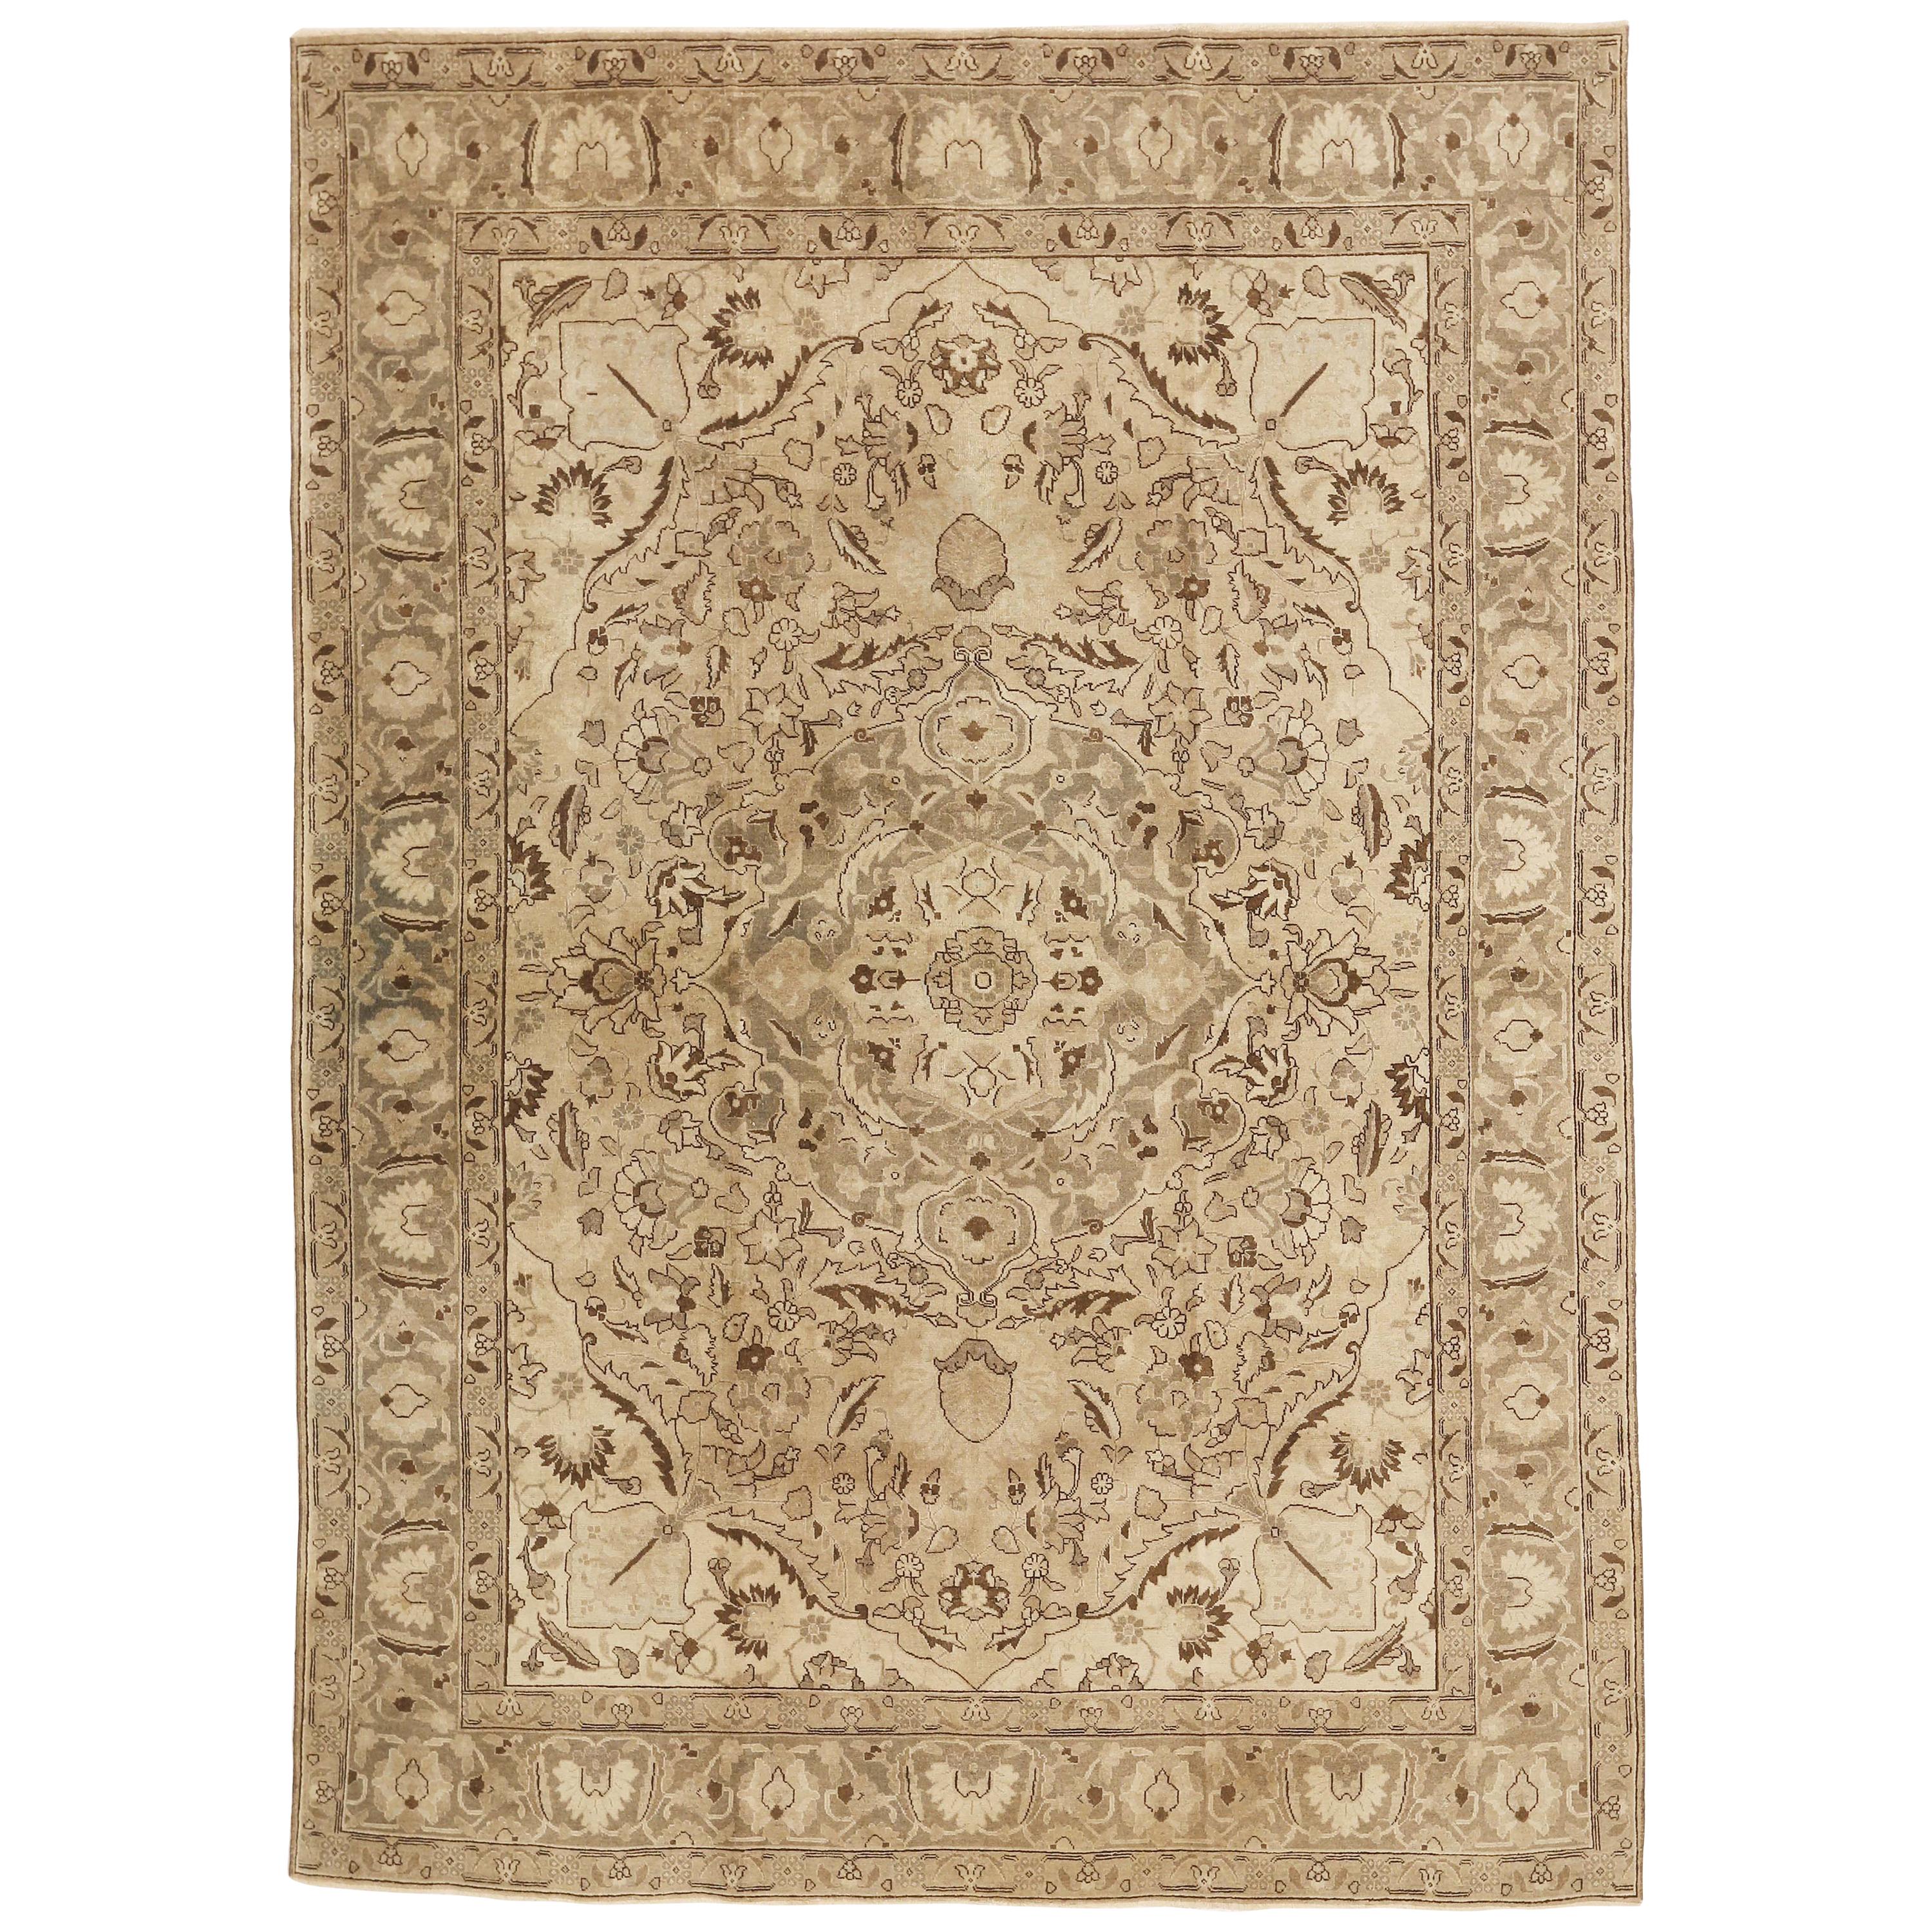 Antique Persian Tabriz Rug with Brown Botanical Details on Ivory Field